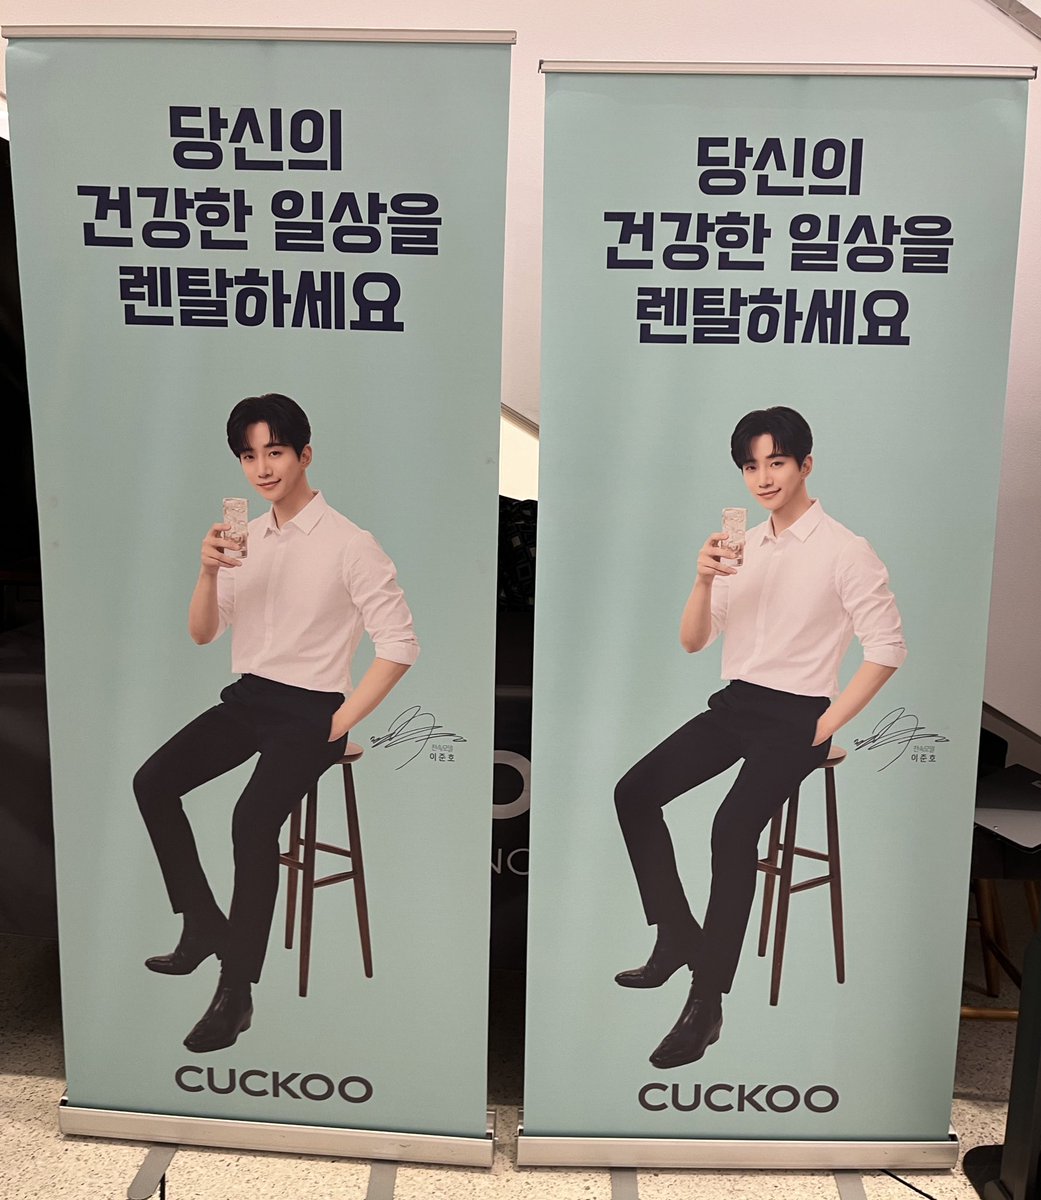 I was about to take the escalator up to grab food but this familiar face stopped me! Didn’t expect to see Junho’s Cuckoo banner here.😍 Hoping one day he will come to New York to promote for them 😊

#LeeJunHo #이준호 #イジュノ #李俊昊 #Cuckoo